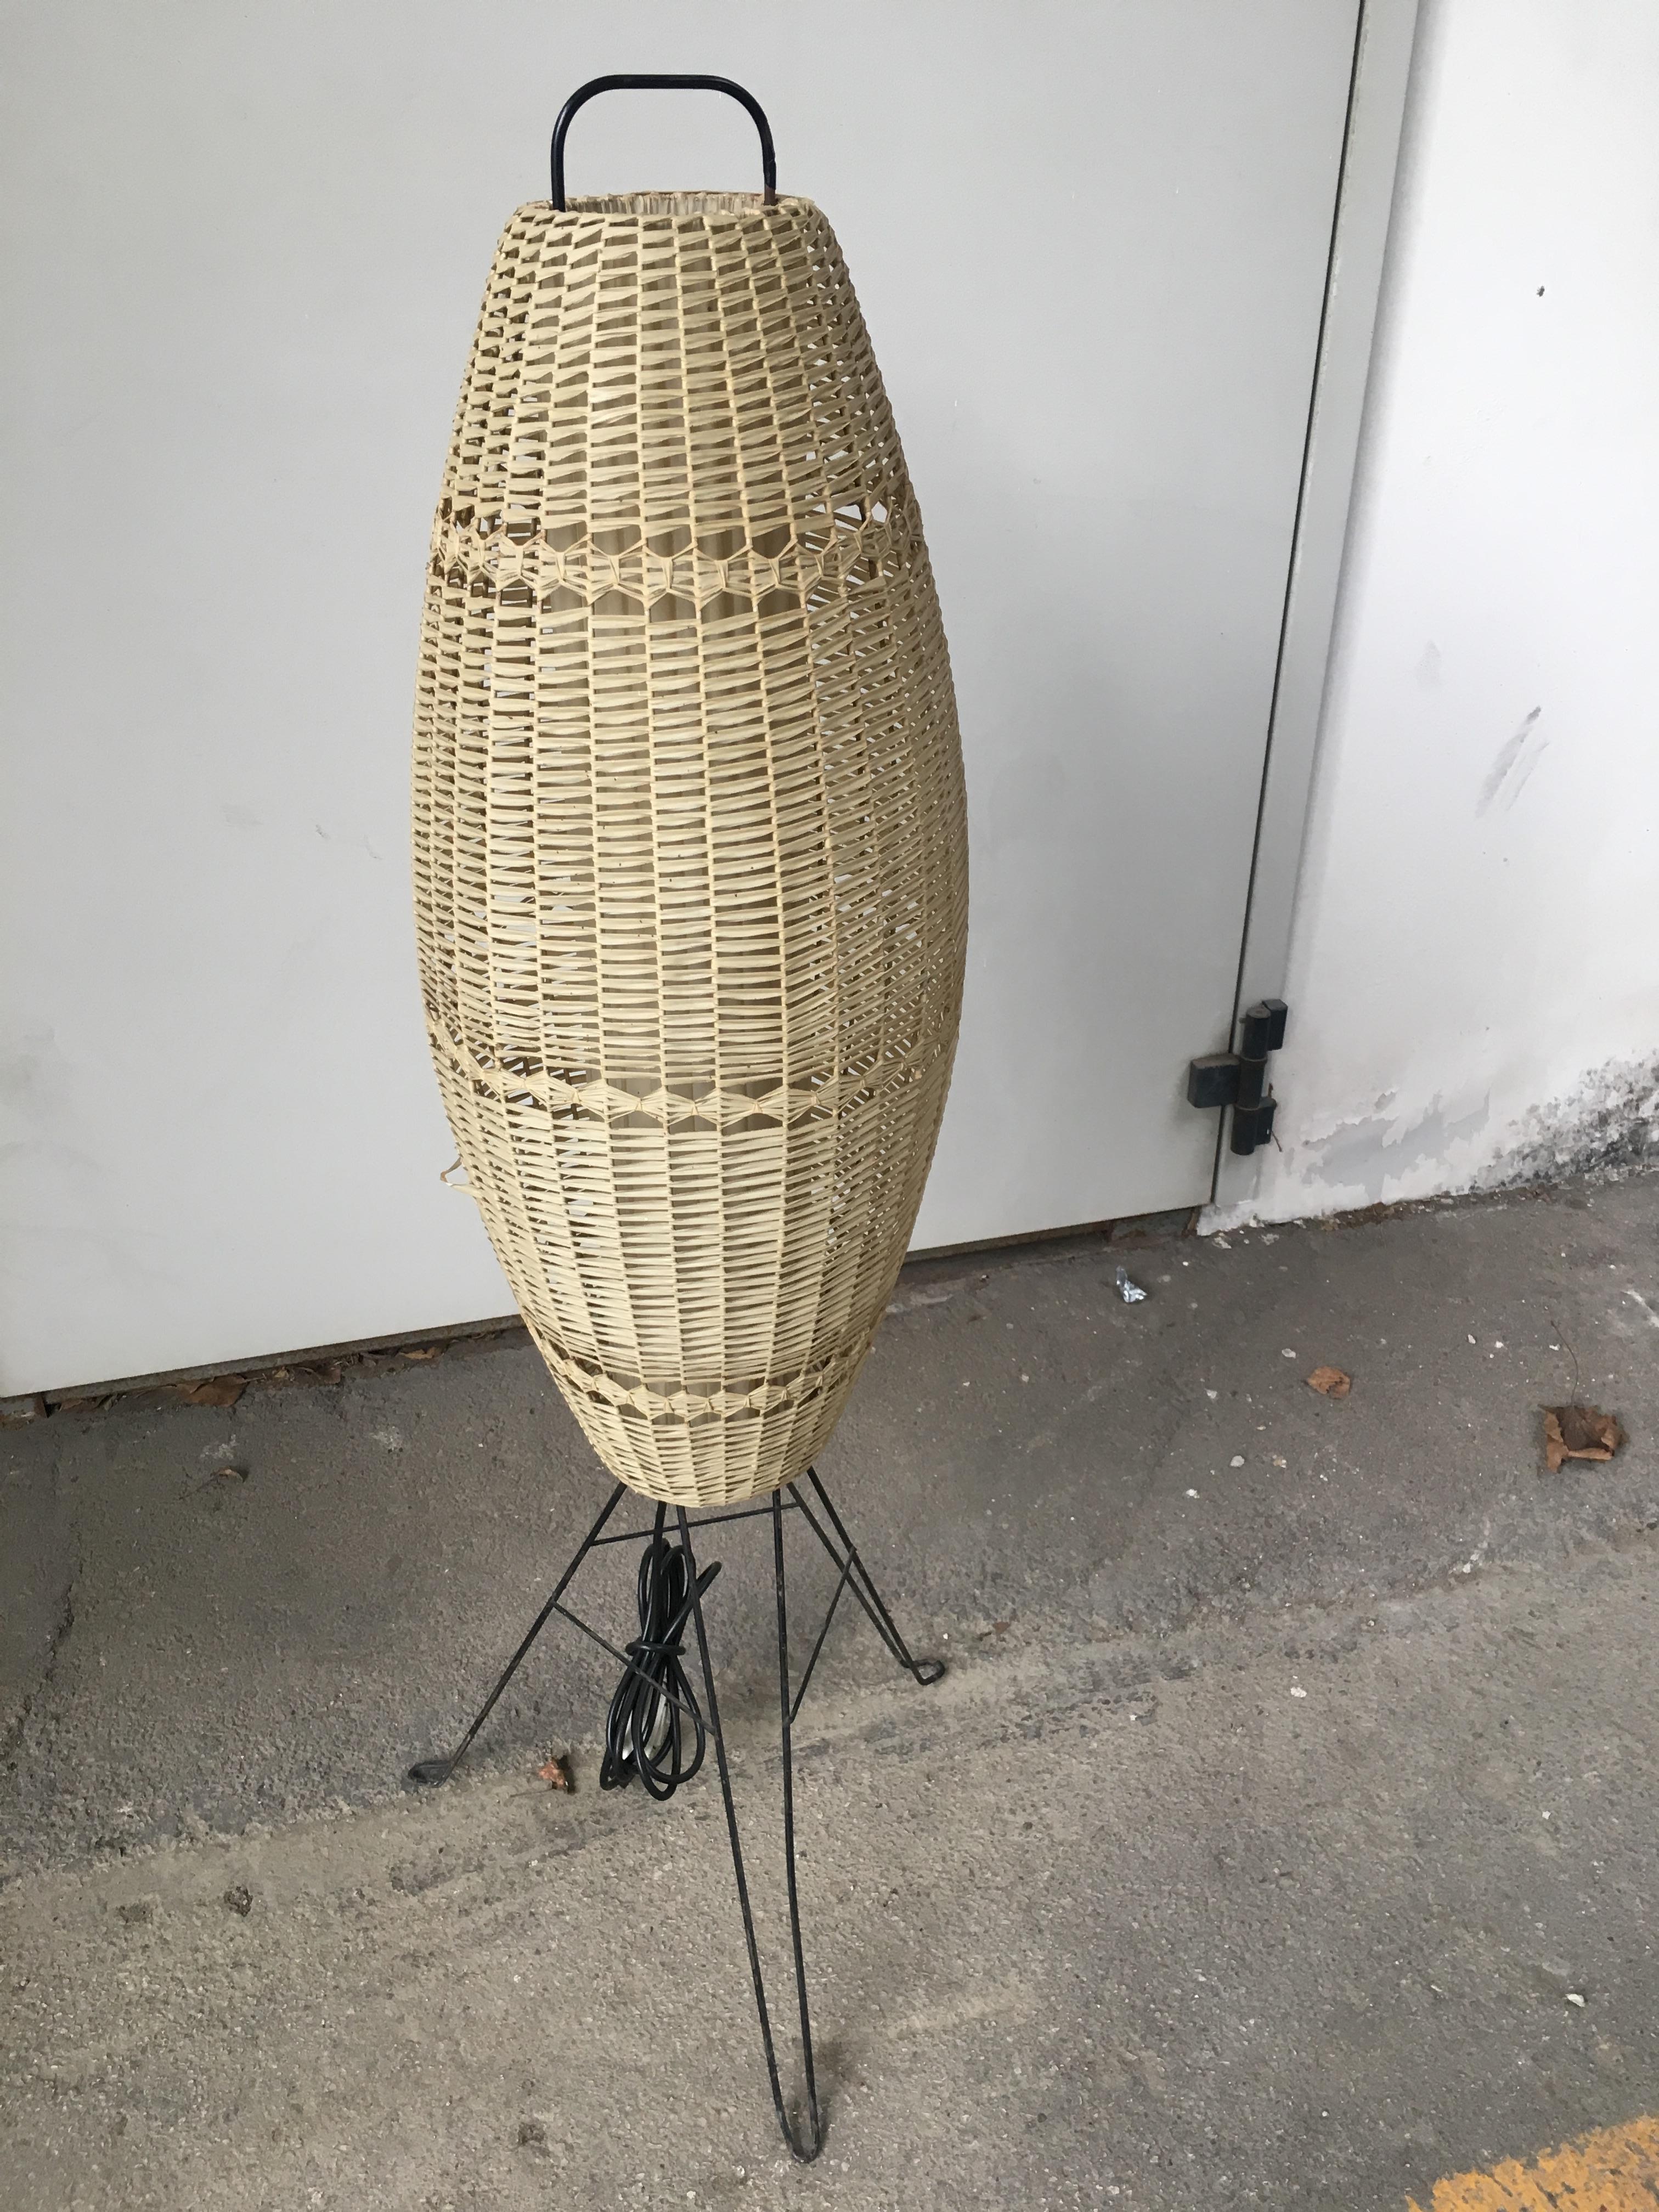 Mid-Century Modern Italian floor lamp with braided tape, 1960s
This lamp is in good vintage conditions wear consistent with age and use.